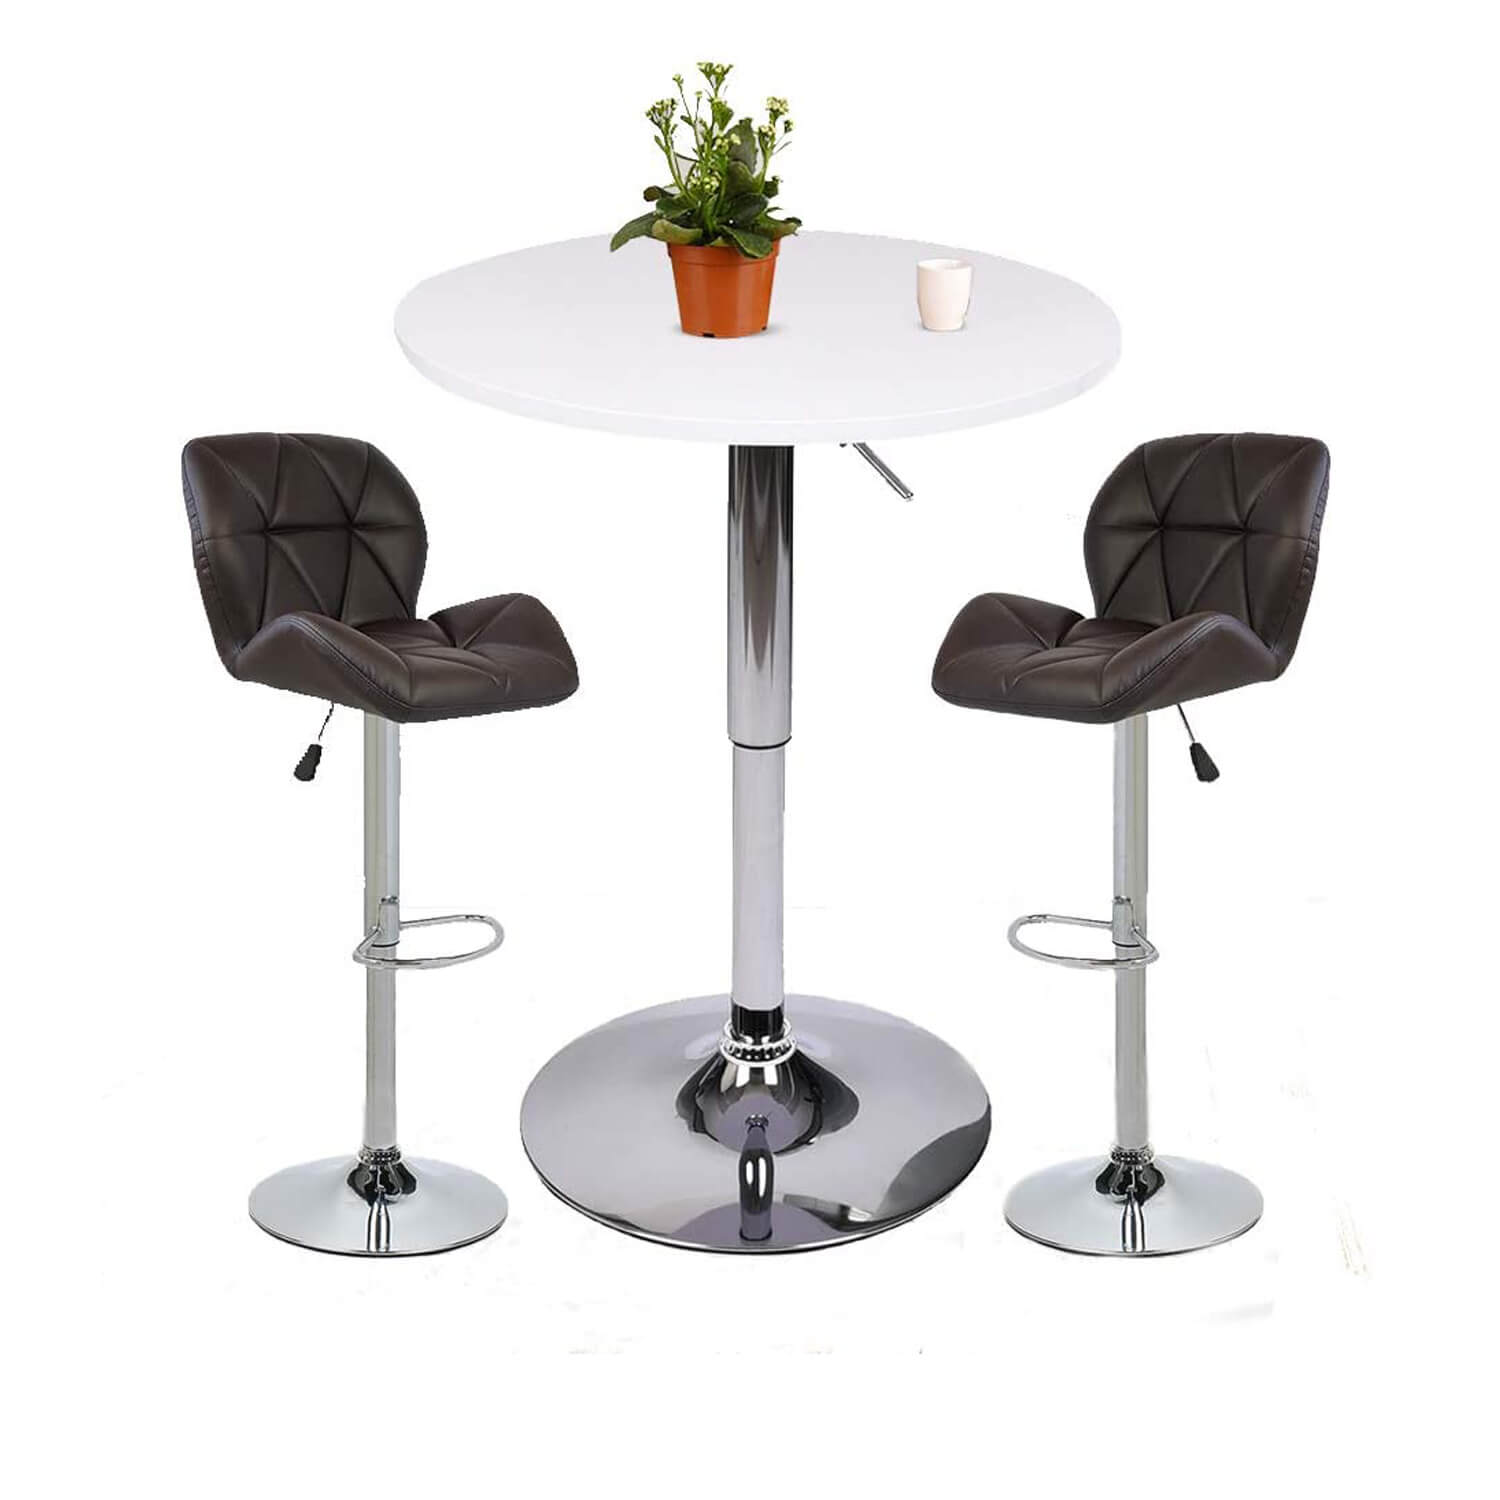 Elecwish Bar Table Set 3-Piece OW0301 white bar table with brown bar stools